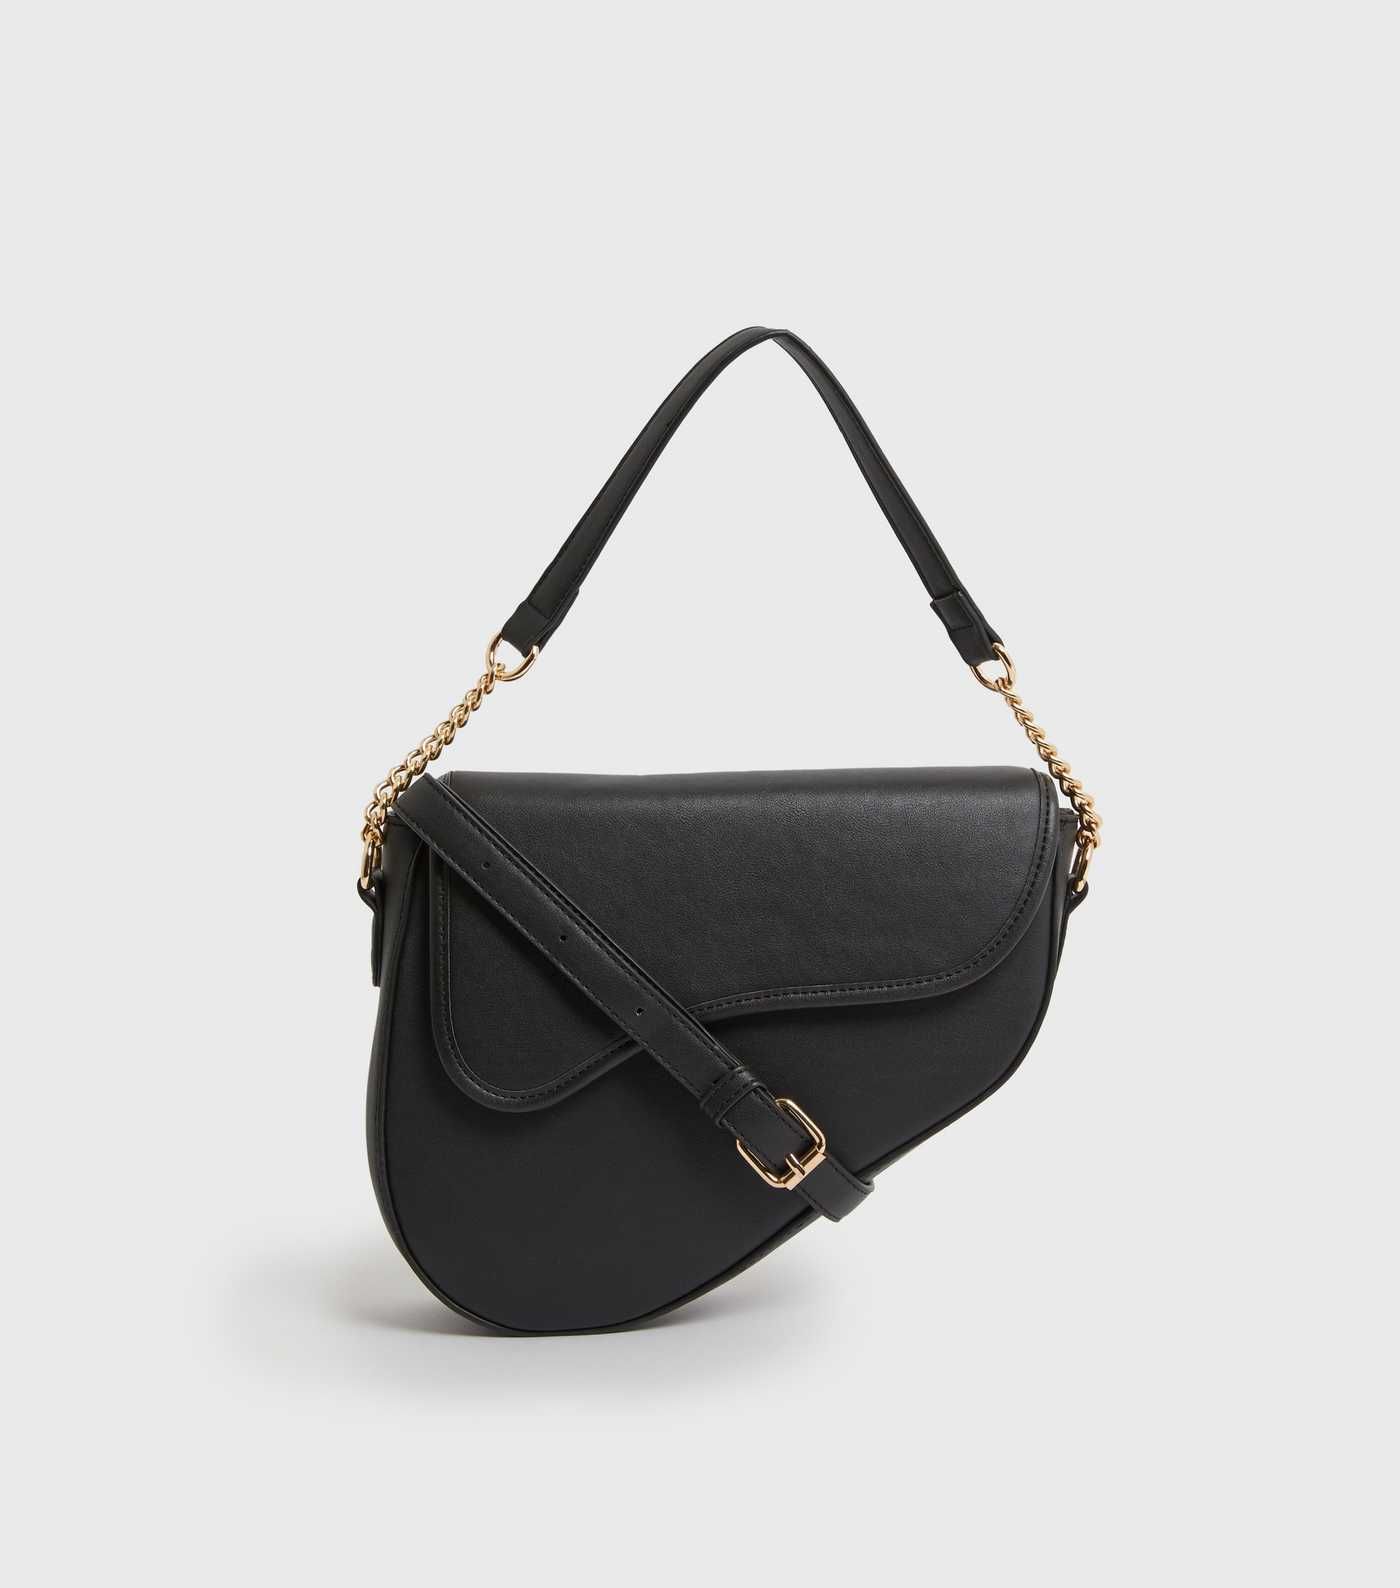 Public Desire Black Saddle Cross Body Bag
						
						Add to Saved Items
						Remove from Saved... | New Look (UK)